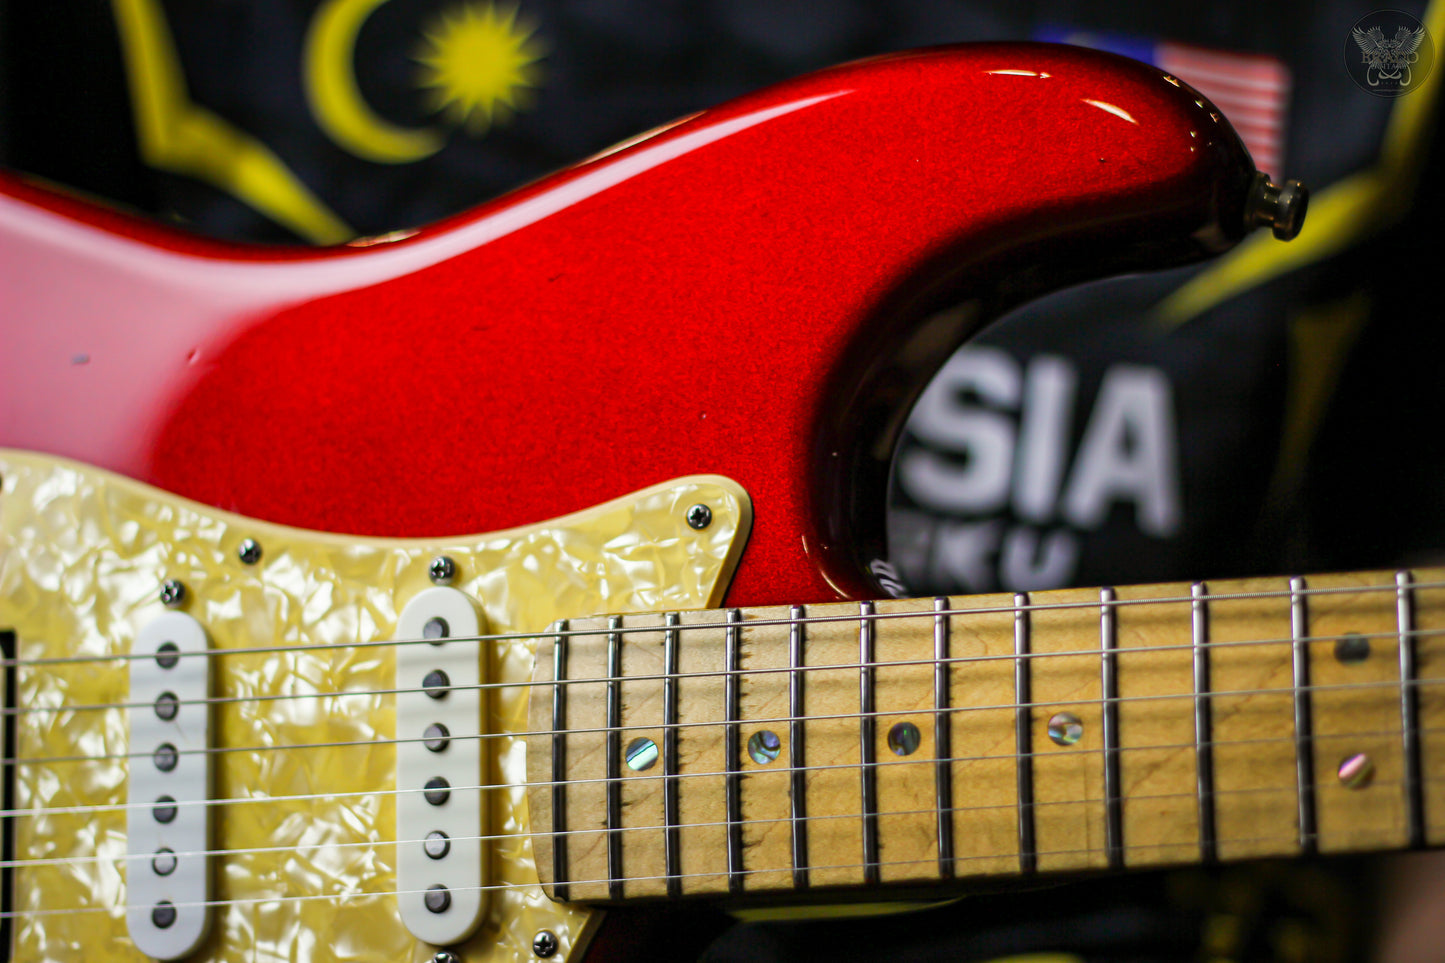 2007 FENDER AMERICAN DELUXE STRATOCASTER® "V" NECK CANDY APPLE RED MADE IN USA (USED- HEAVY MODS)